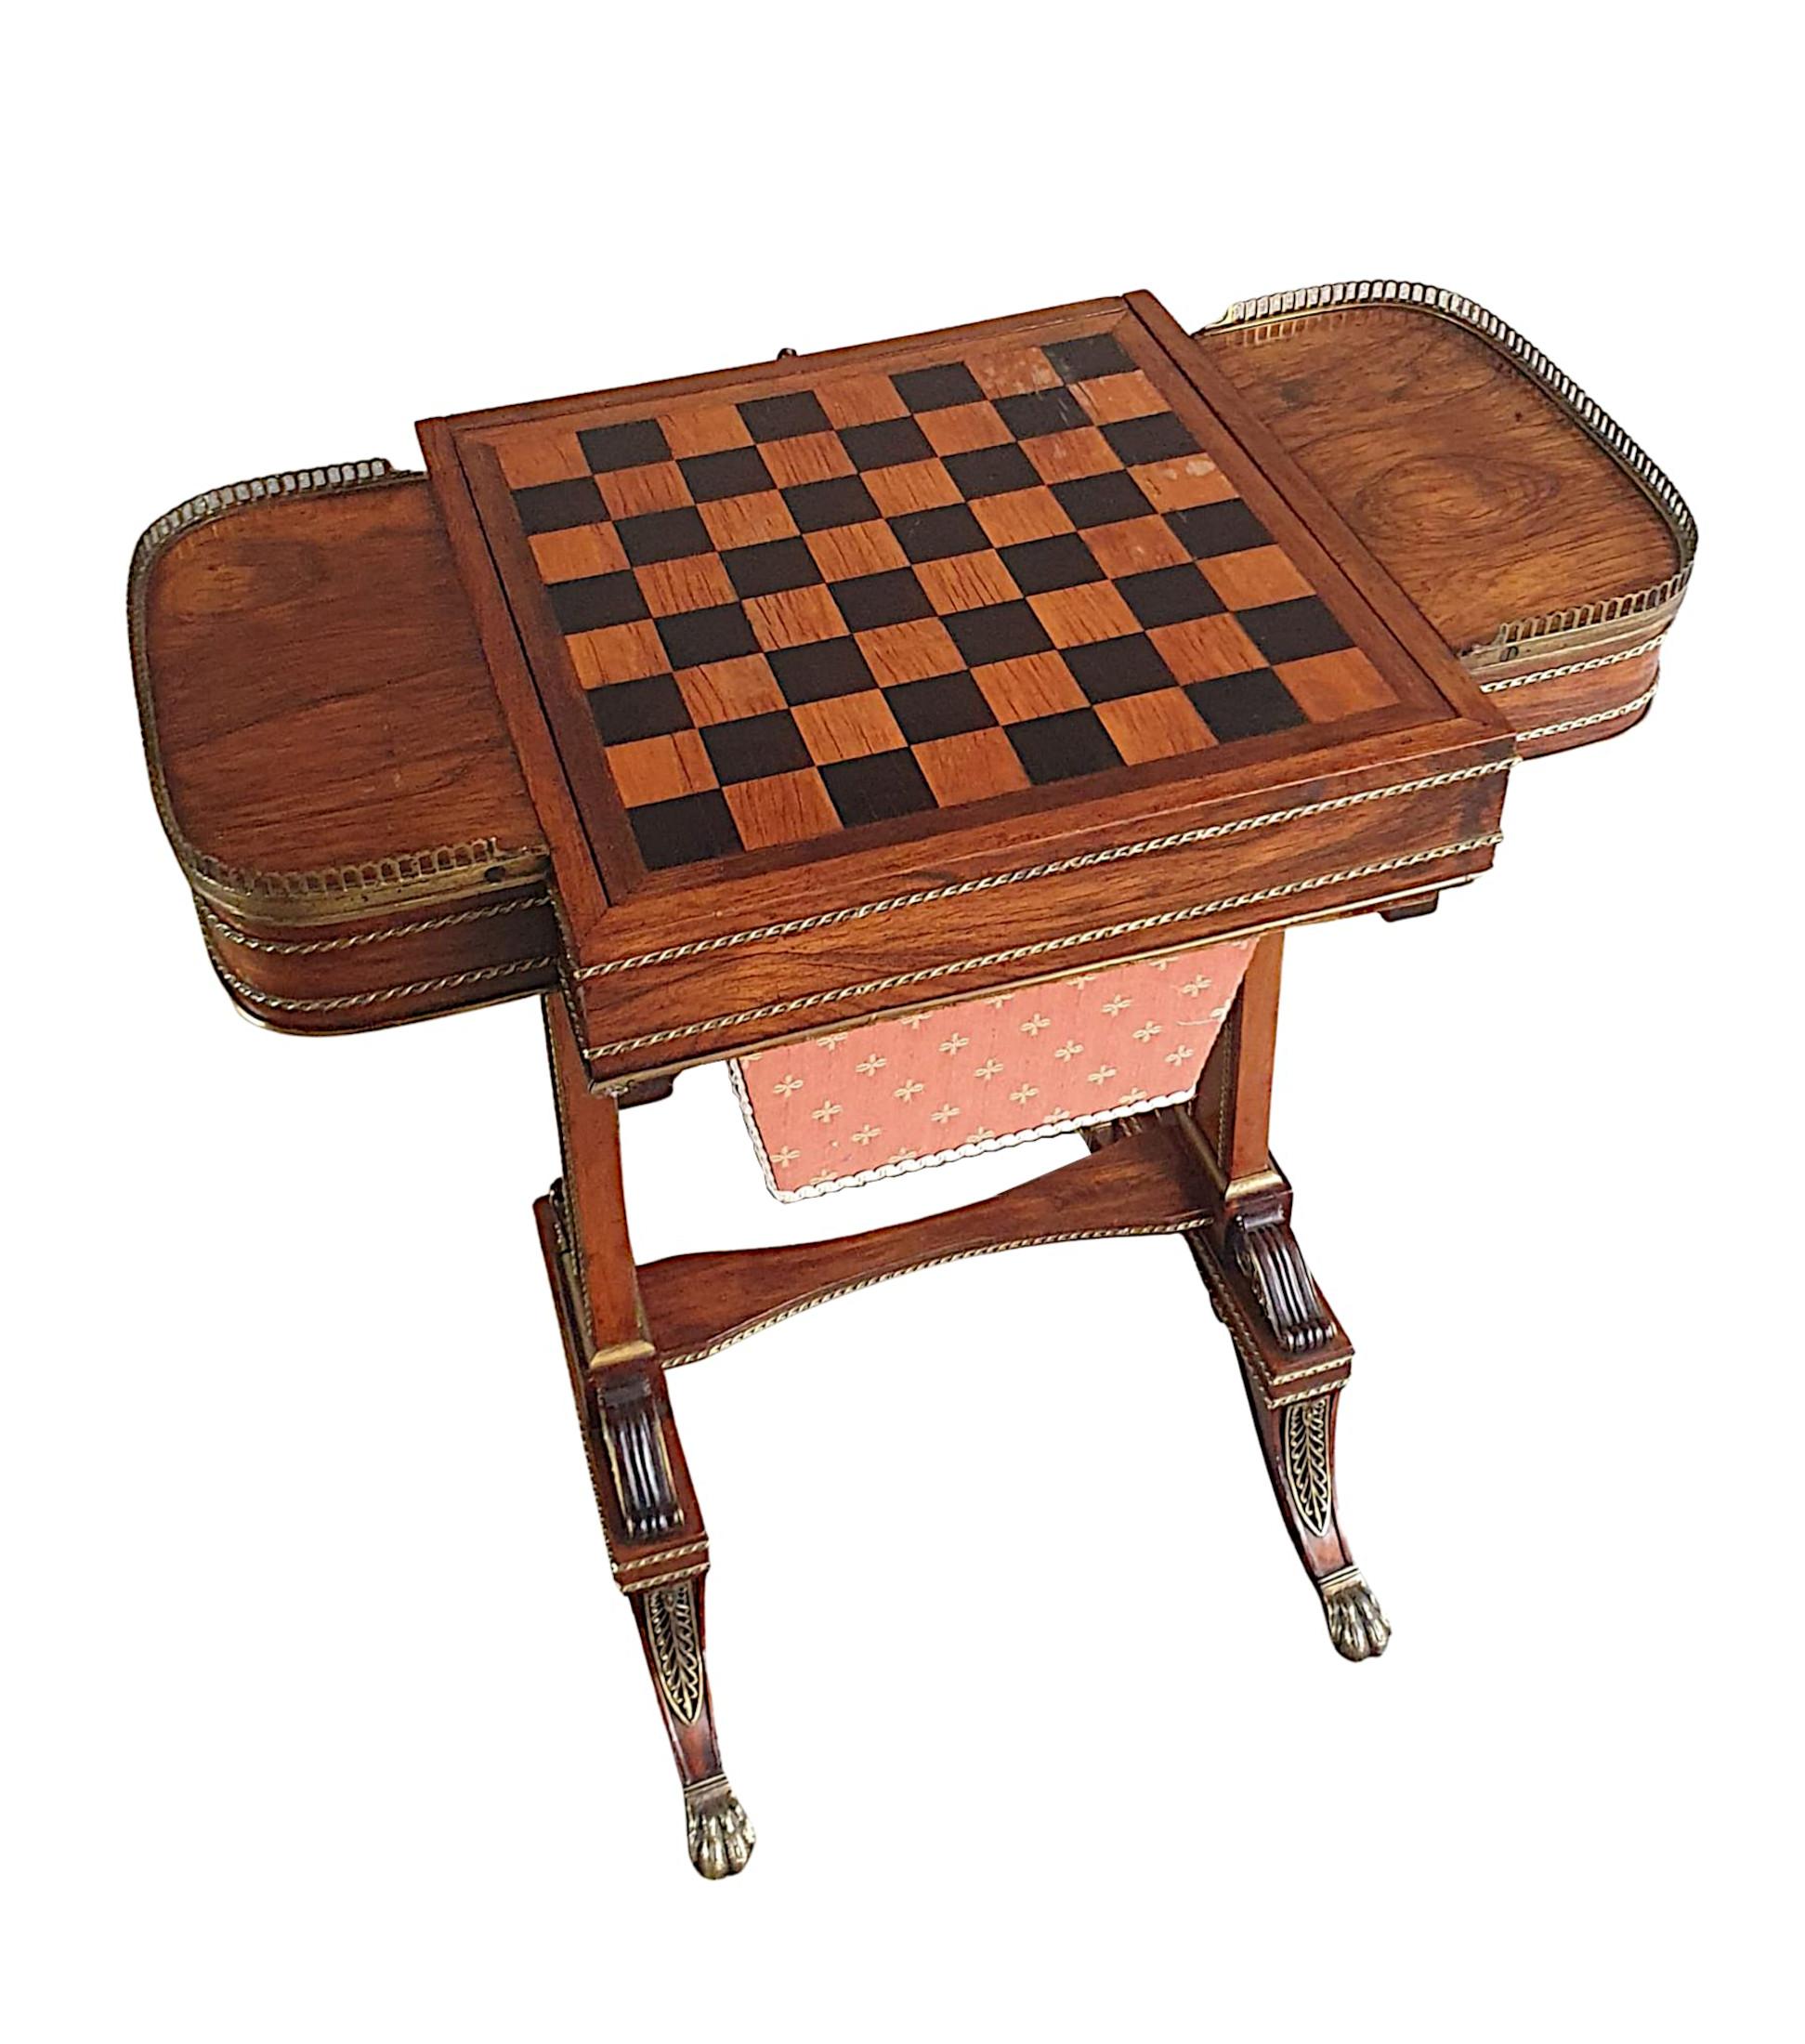 A rare, stunning quality early 19th Century Regency fruitwood combination games or work table, inlaid and brass mounted throughout. The moulded central section with inlaid checkerboard flanked with demilune sides with pierced brass gallery grille.